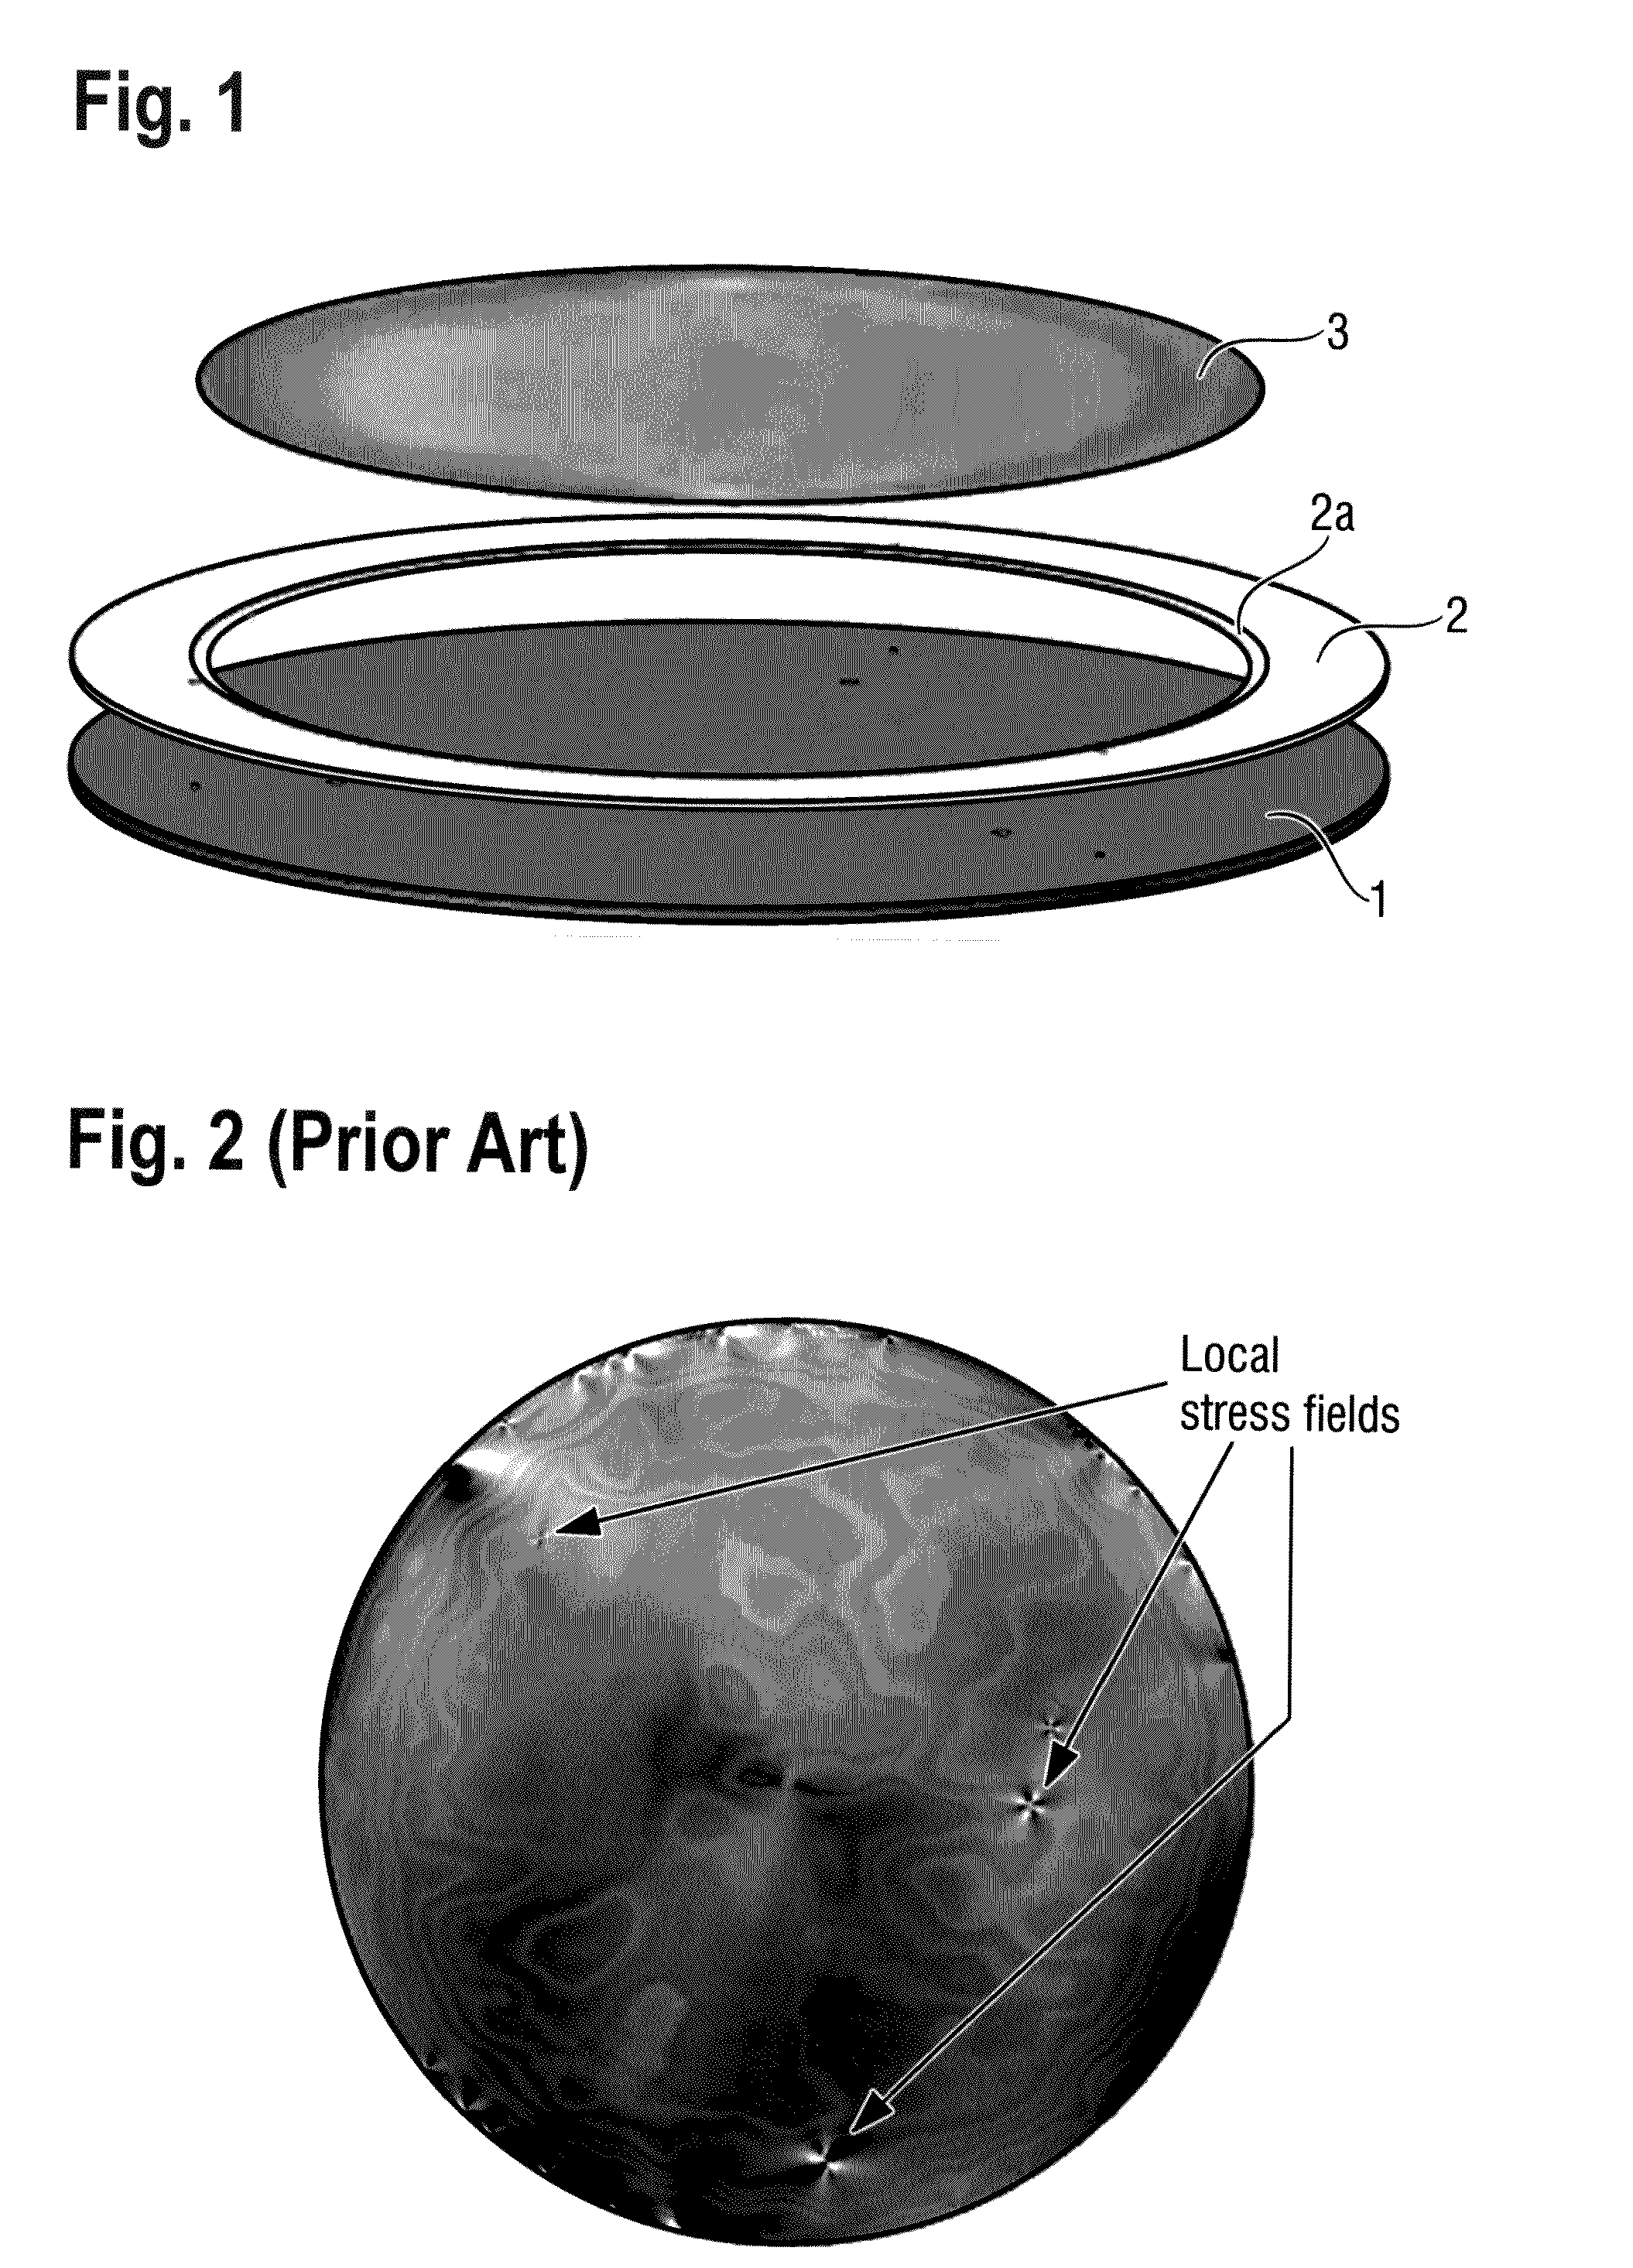 Epitaxially coated semiconductor wafer and device and method for producing an epitaxially coated semiconductor wafer